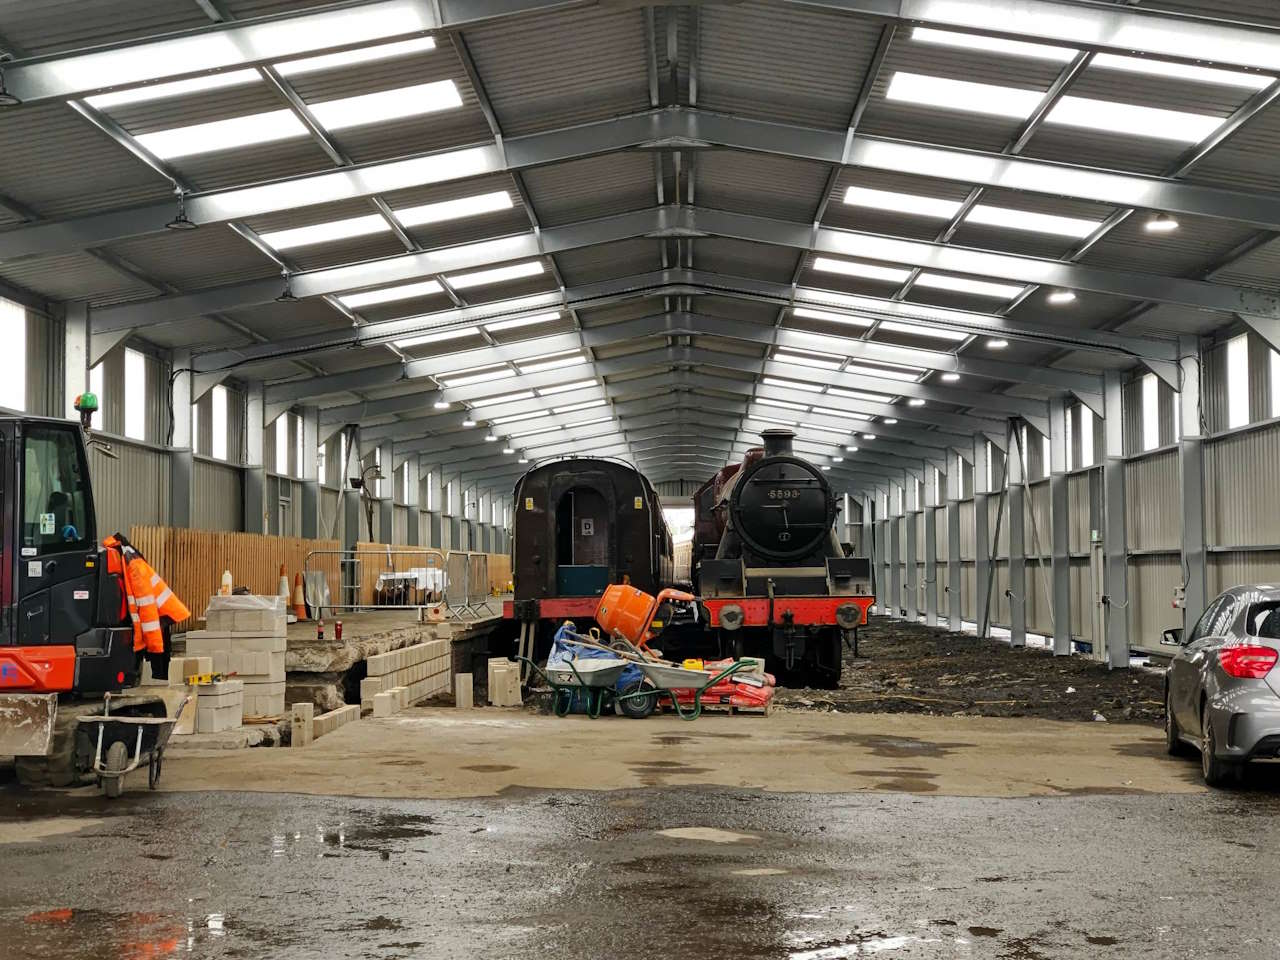 Inside the carriage shed